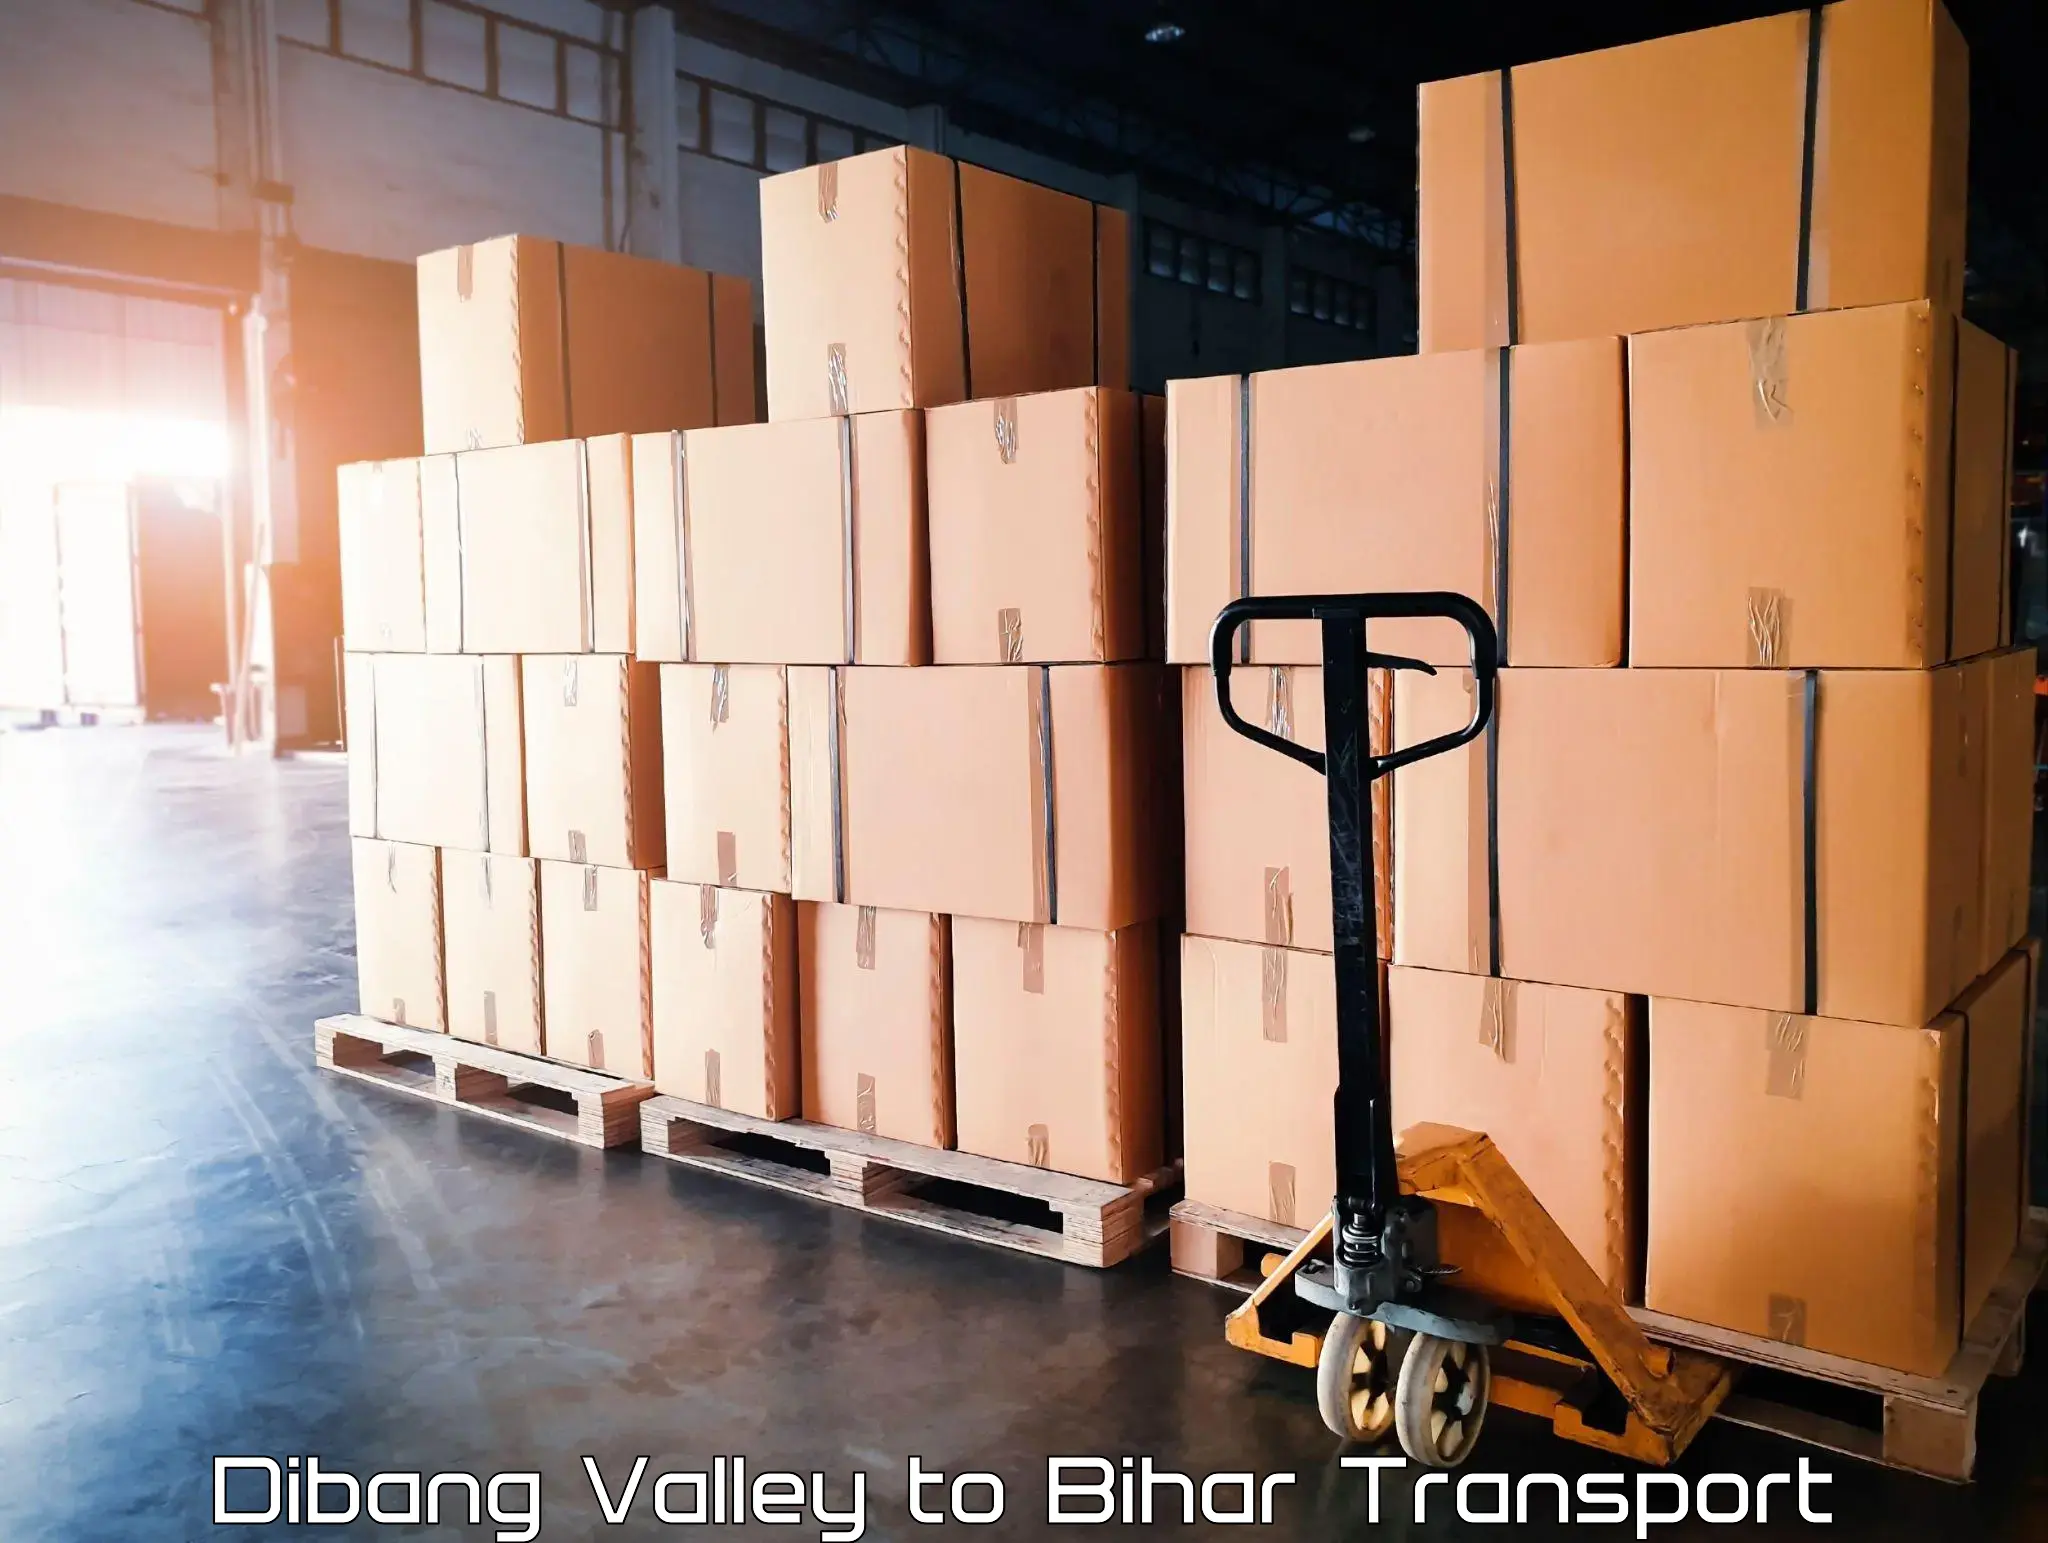 Daily parcel service transport Dibang Valley to Sandesh